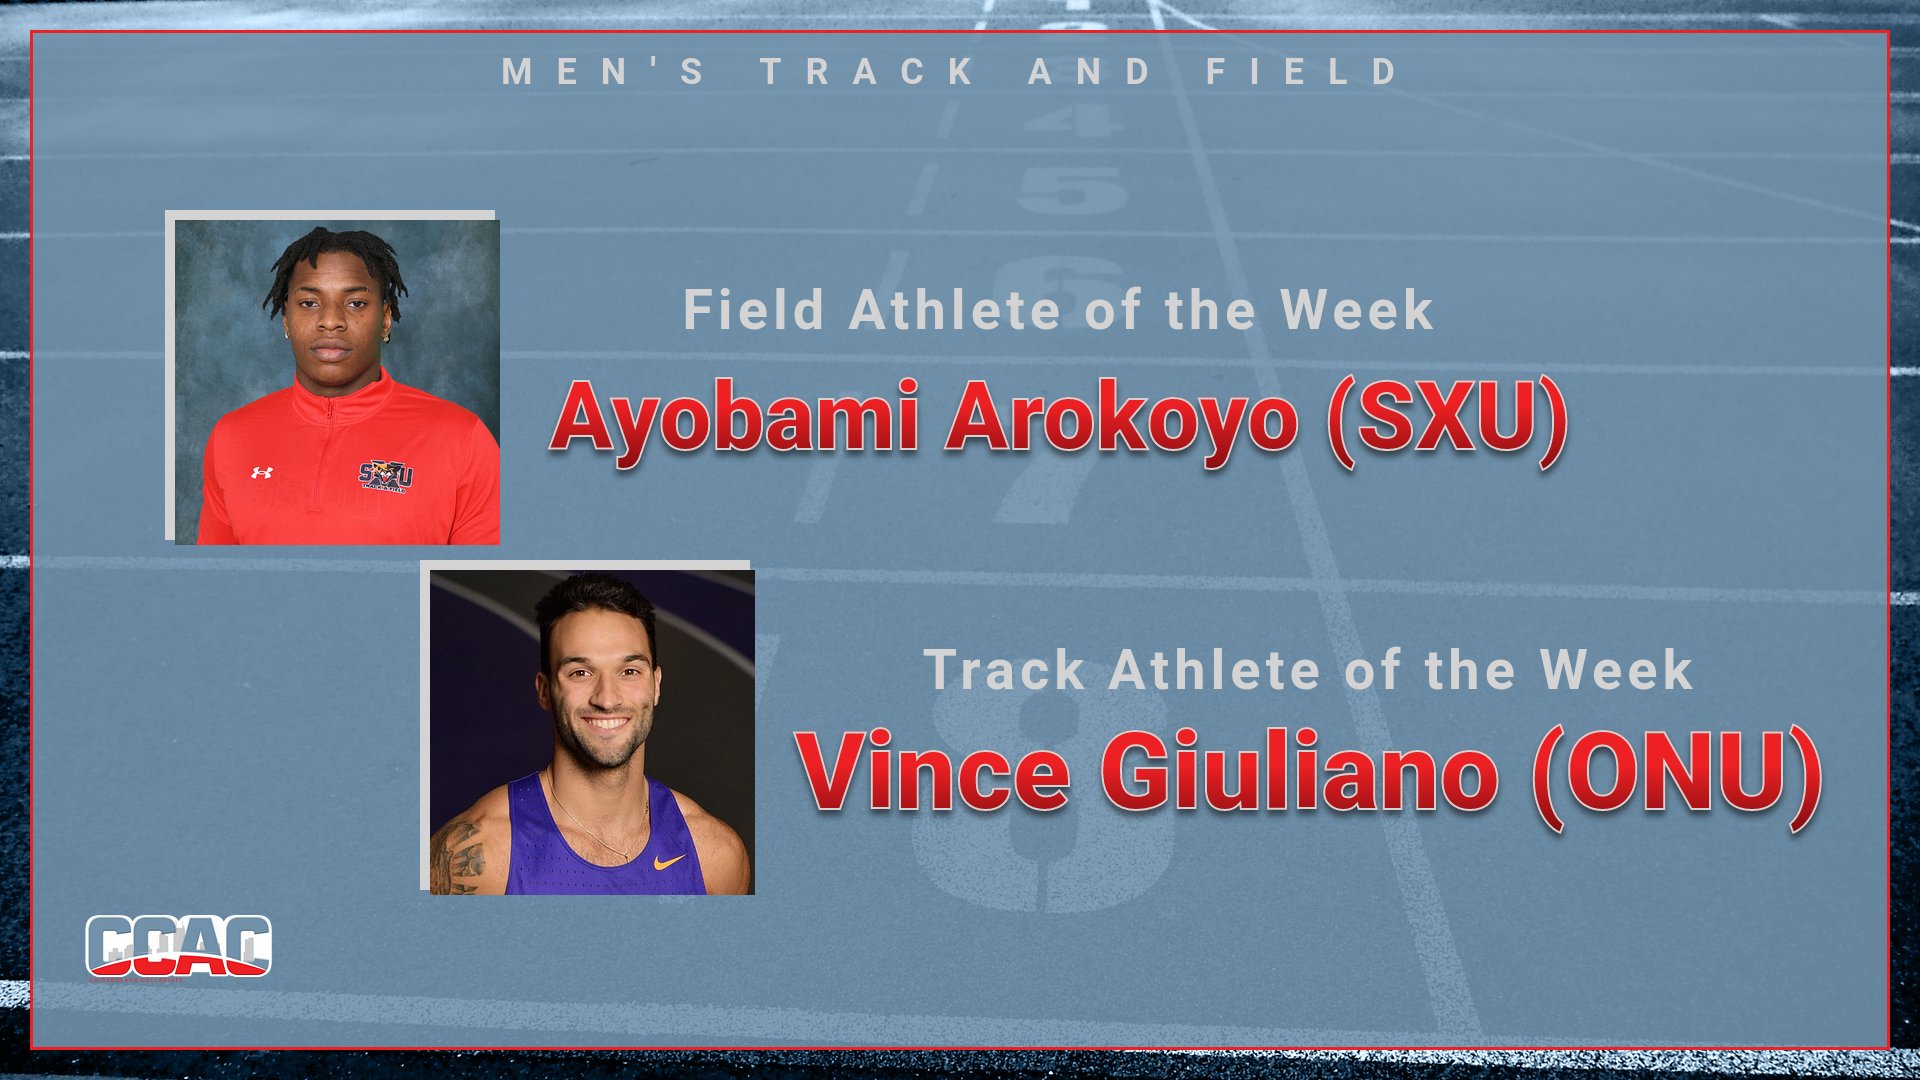 Sweep of First-Place Finishes Result In Men's T&F Weekly Accolades For ONU's Giuliano, SXU's Arokoyo